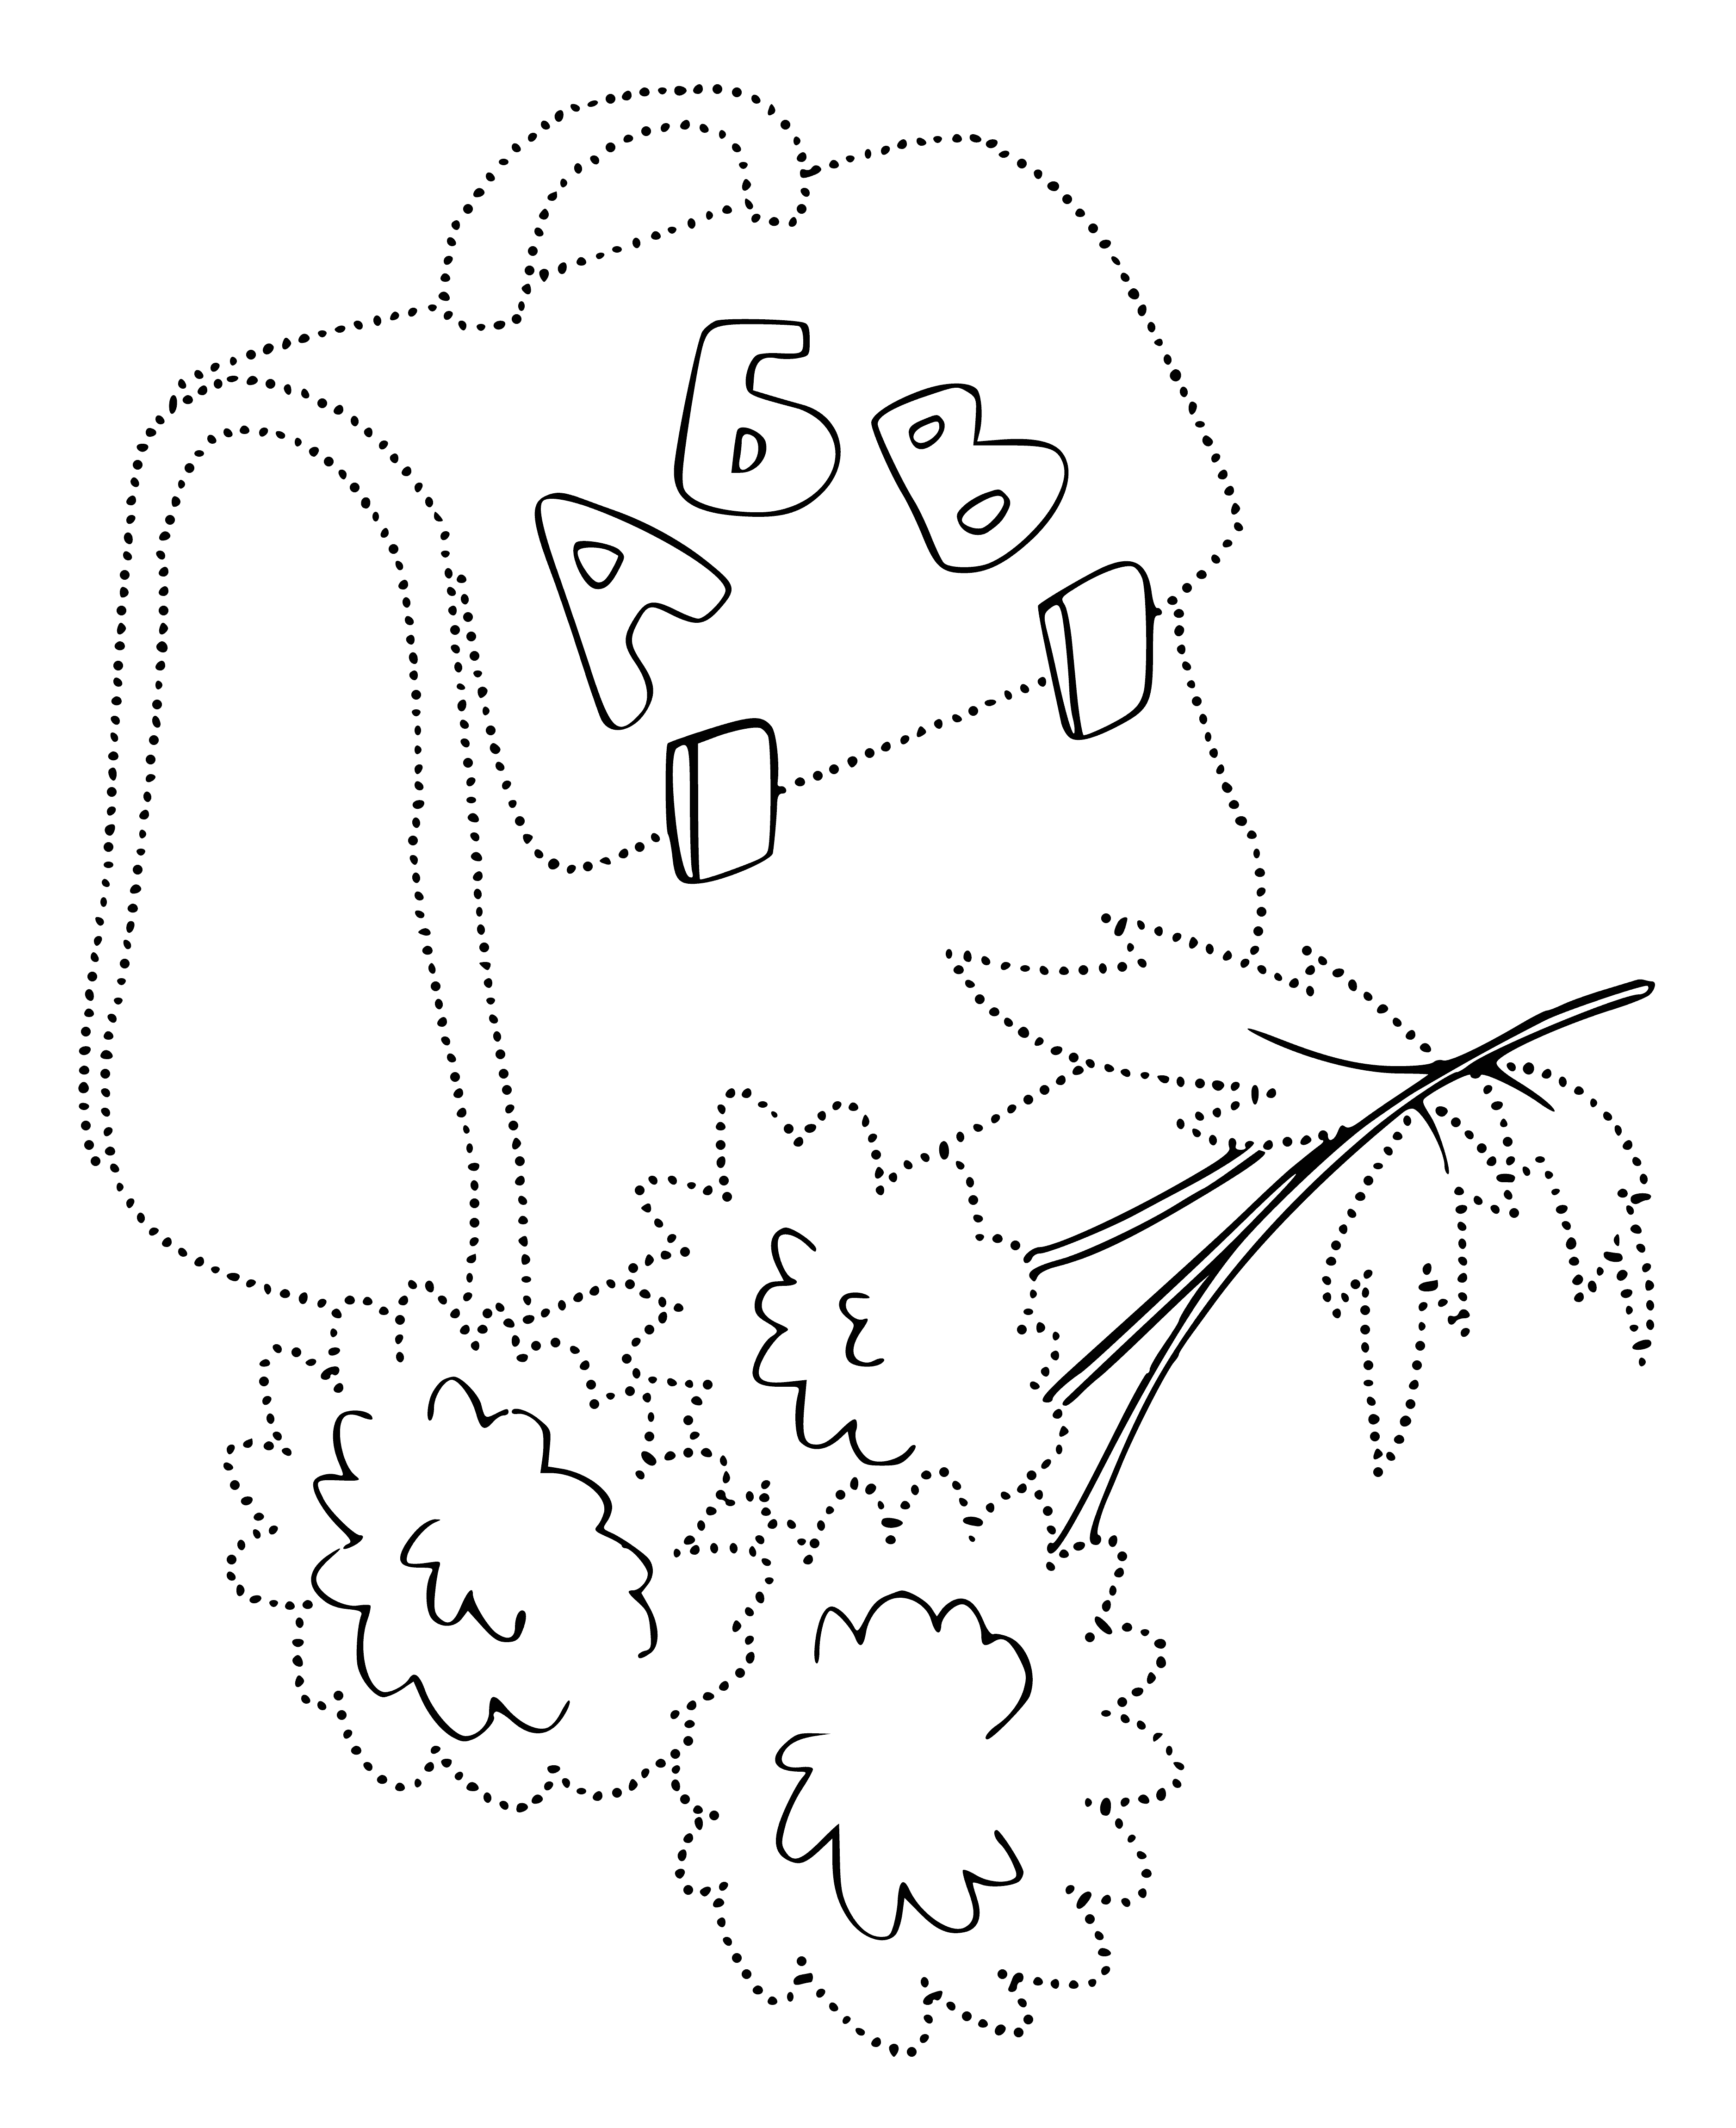 coloring page: Kids playing in colorful leaves, a squirrel gathering nuts and a boy flying a kite in a perfect blue sky.